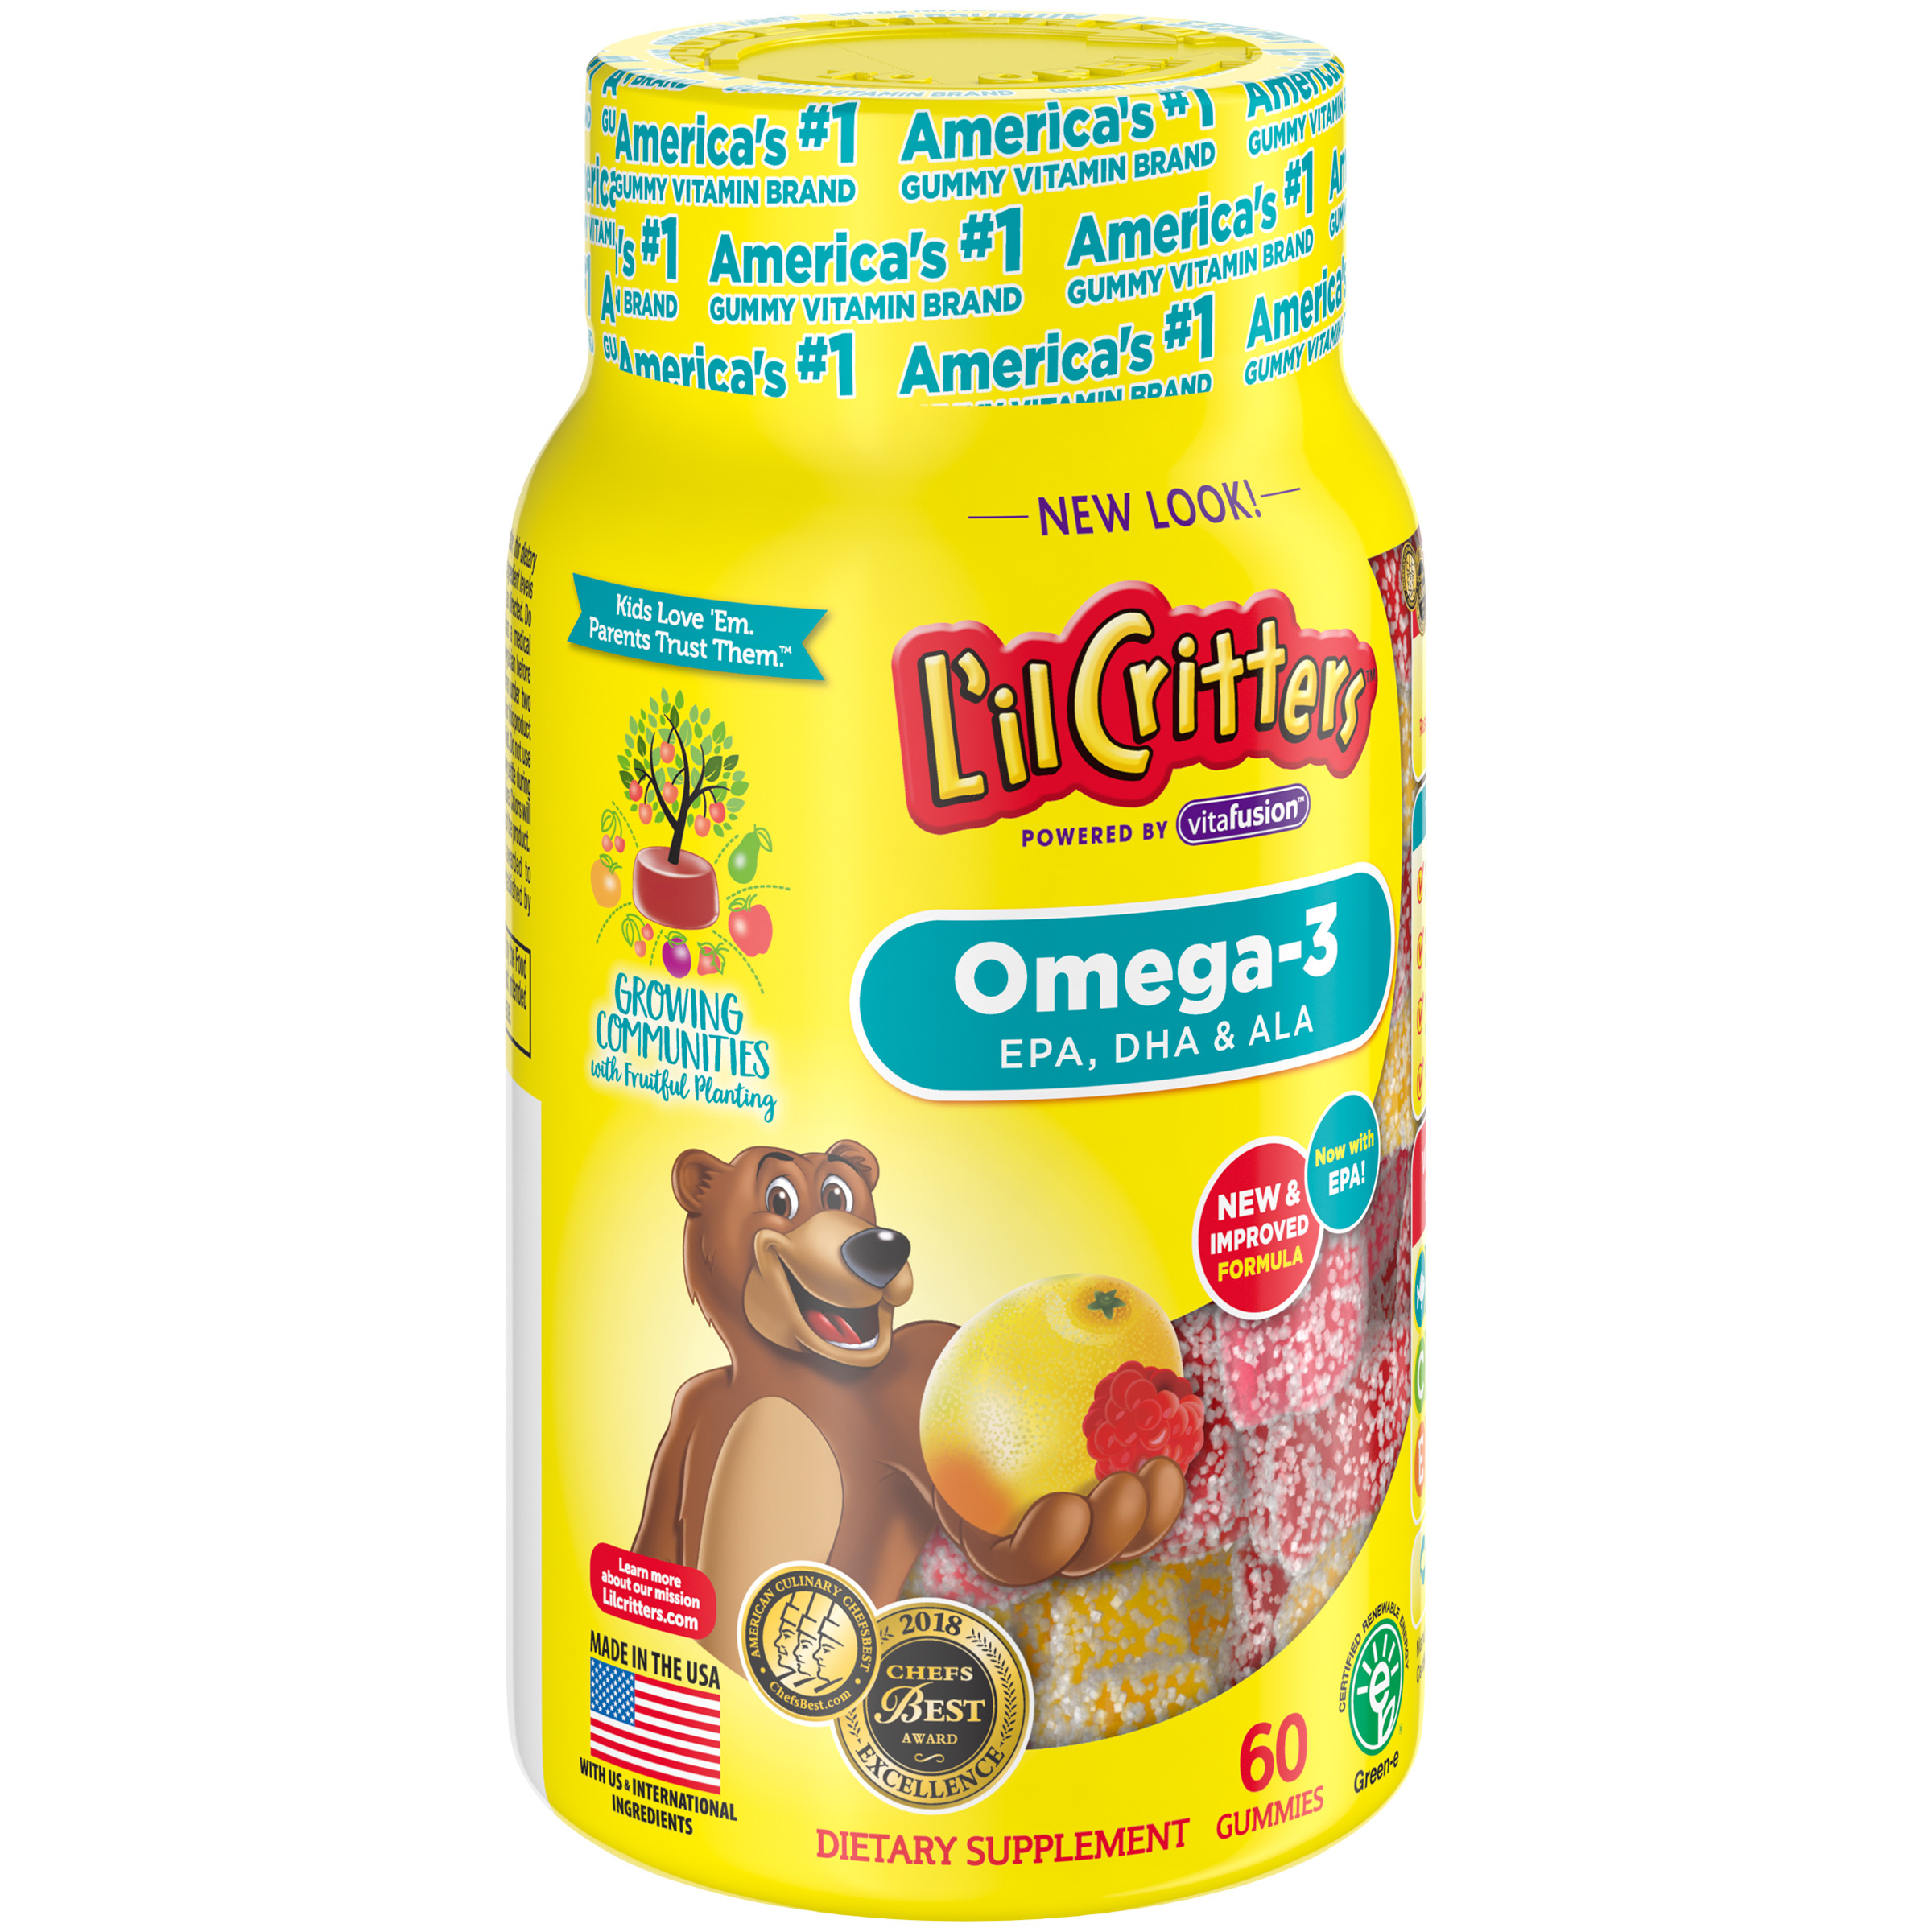 L'il Critters Kids Omega-3 Gummy, 3 fatty acids, DHA, EPA and ALA. 60 ct (30-60 day supply), Delicious Citrus Flavors (No Fishy Taste) from America's Number One Kids Gummy Vitamin Brand - image 2 of 8